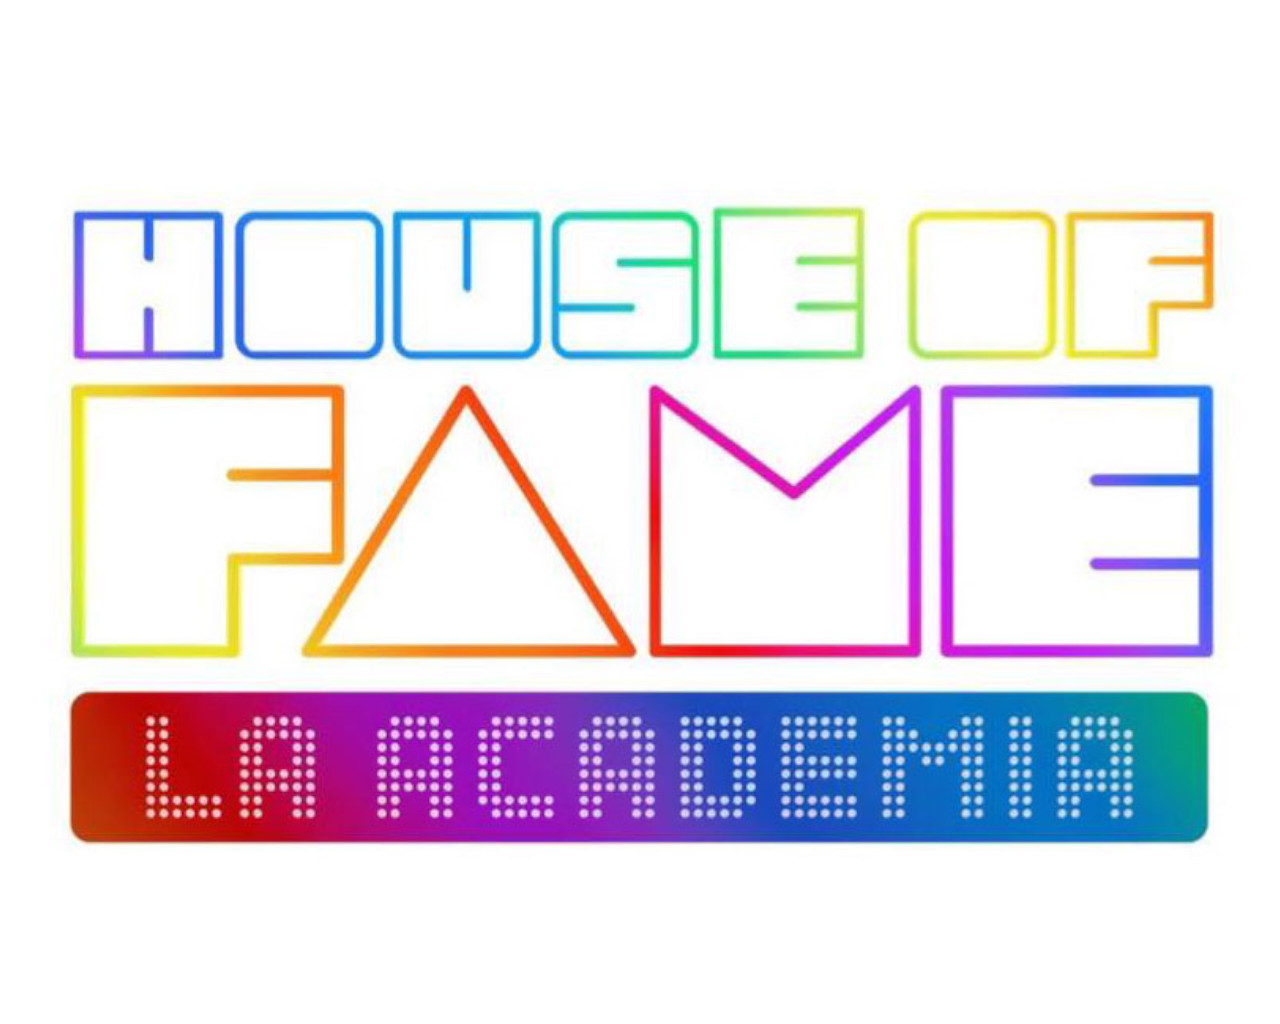 house of fame, house of fame τηλεθέαση, house of fame παίκτες, house of fame καθηγητές, house of fame trailer, house of fame δώρα, house of fame κριτές